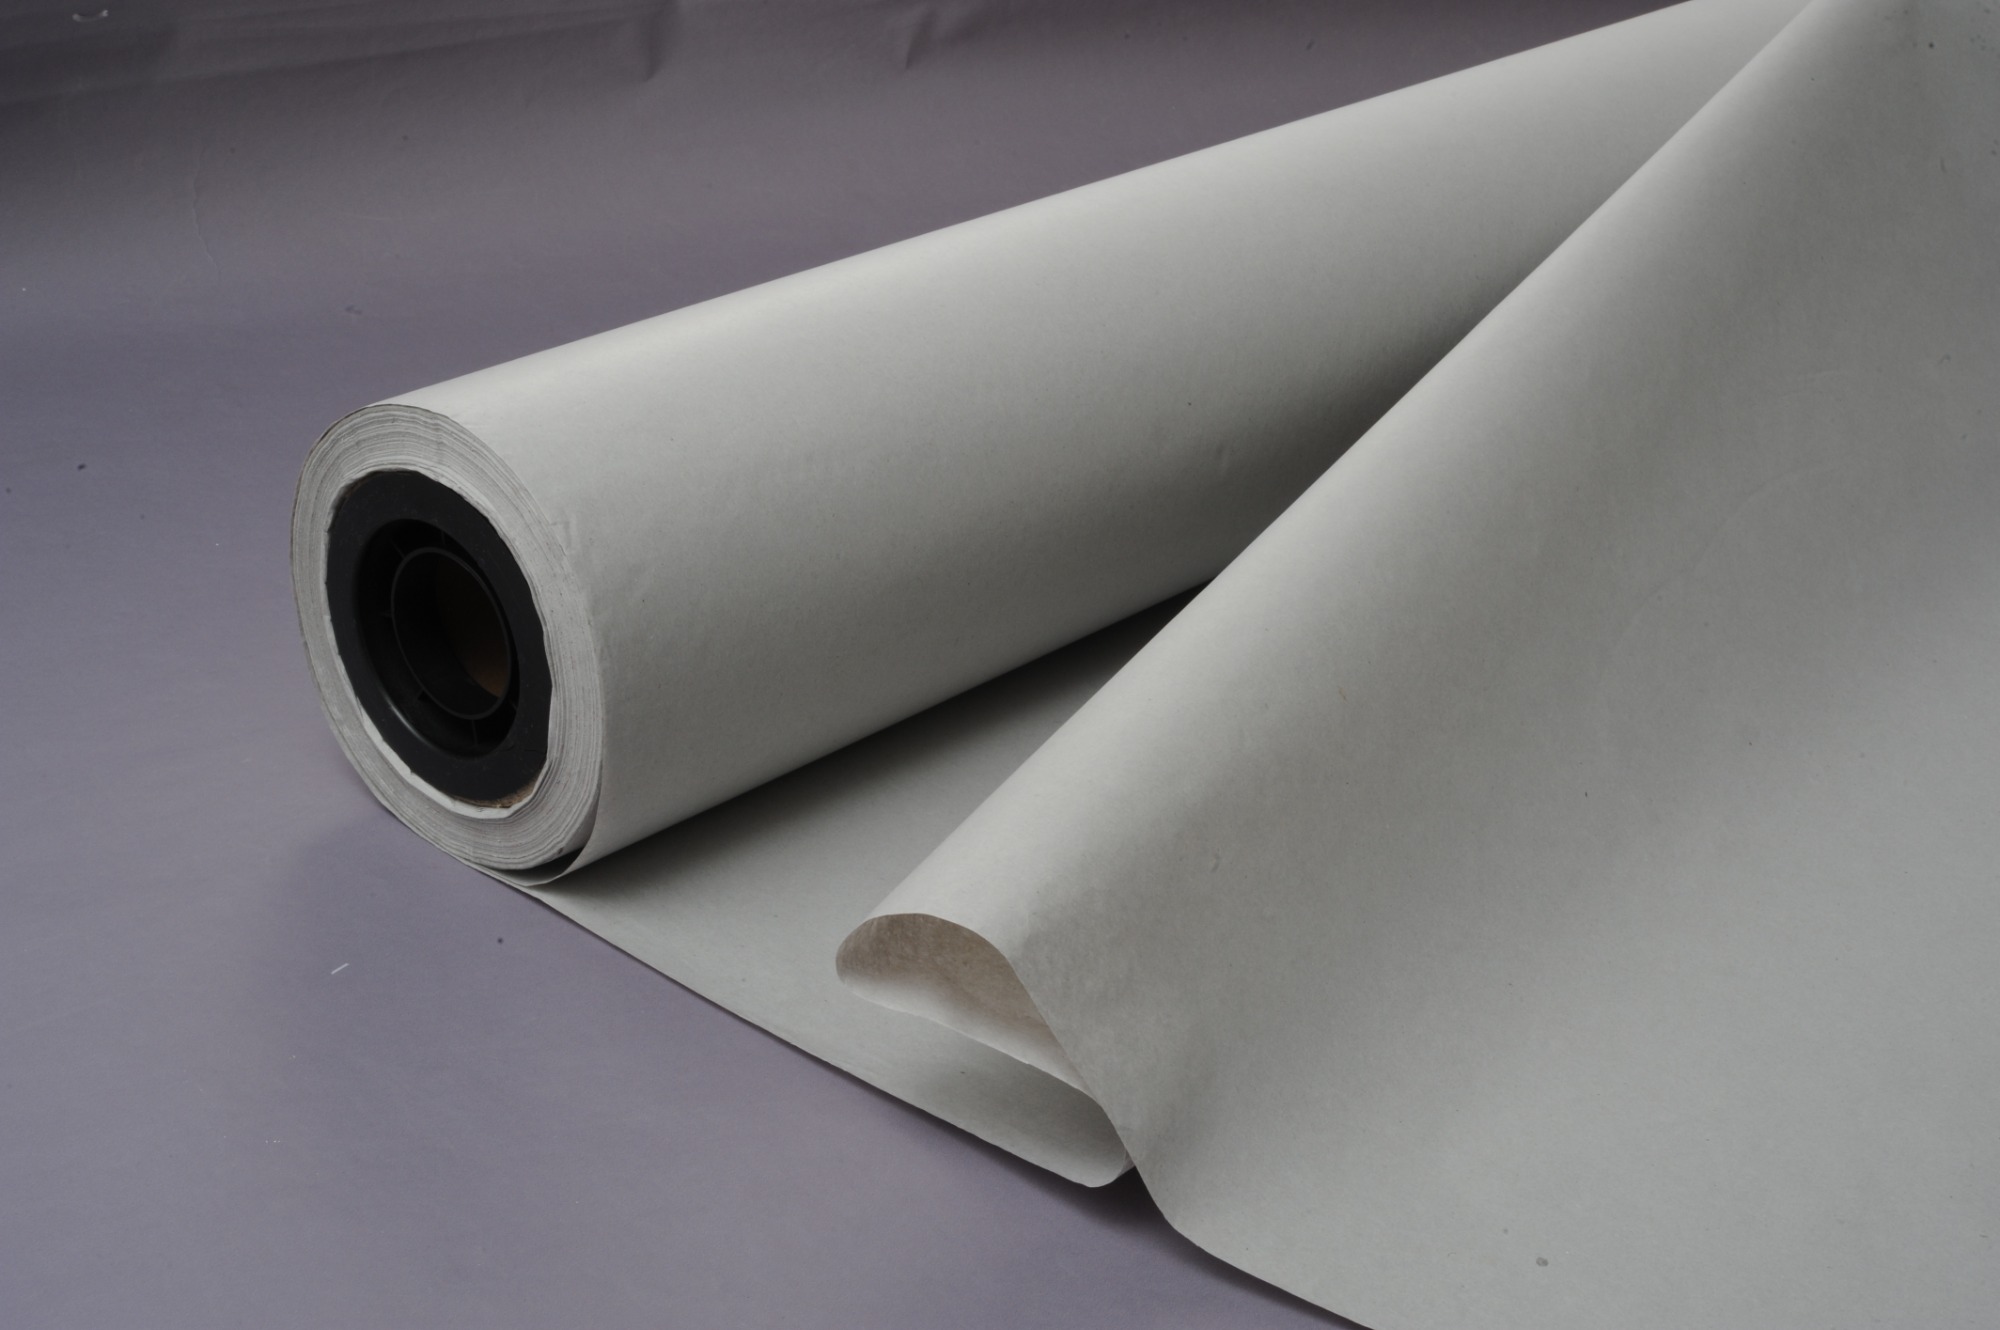 What is a good sublimation protection paper?